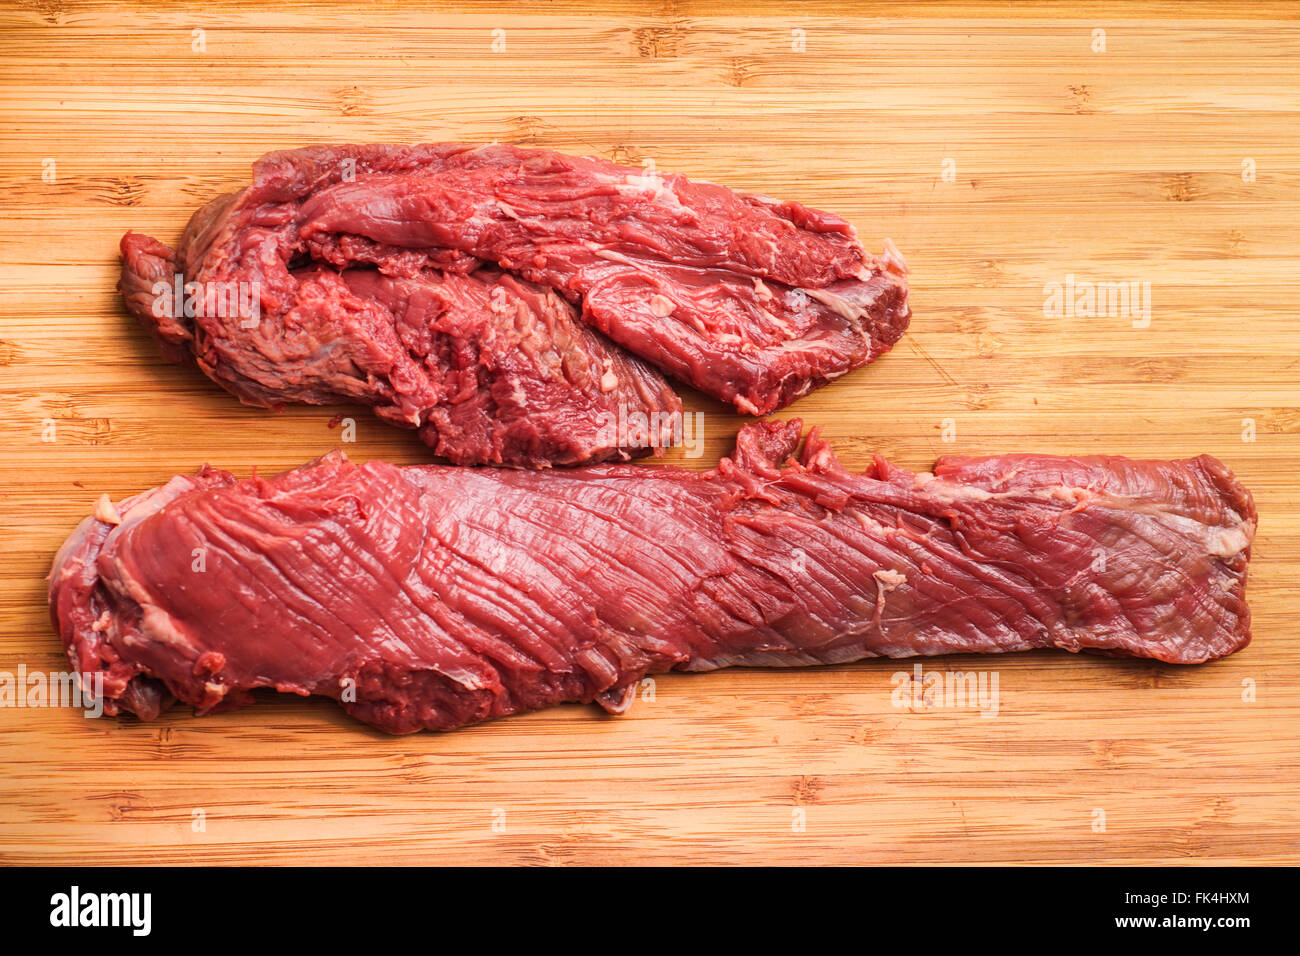 Hanging tender, Hanger steak, onglet - after the meat has been trimmed by the butcher Stock Photo